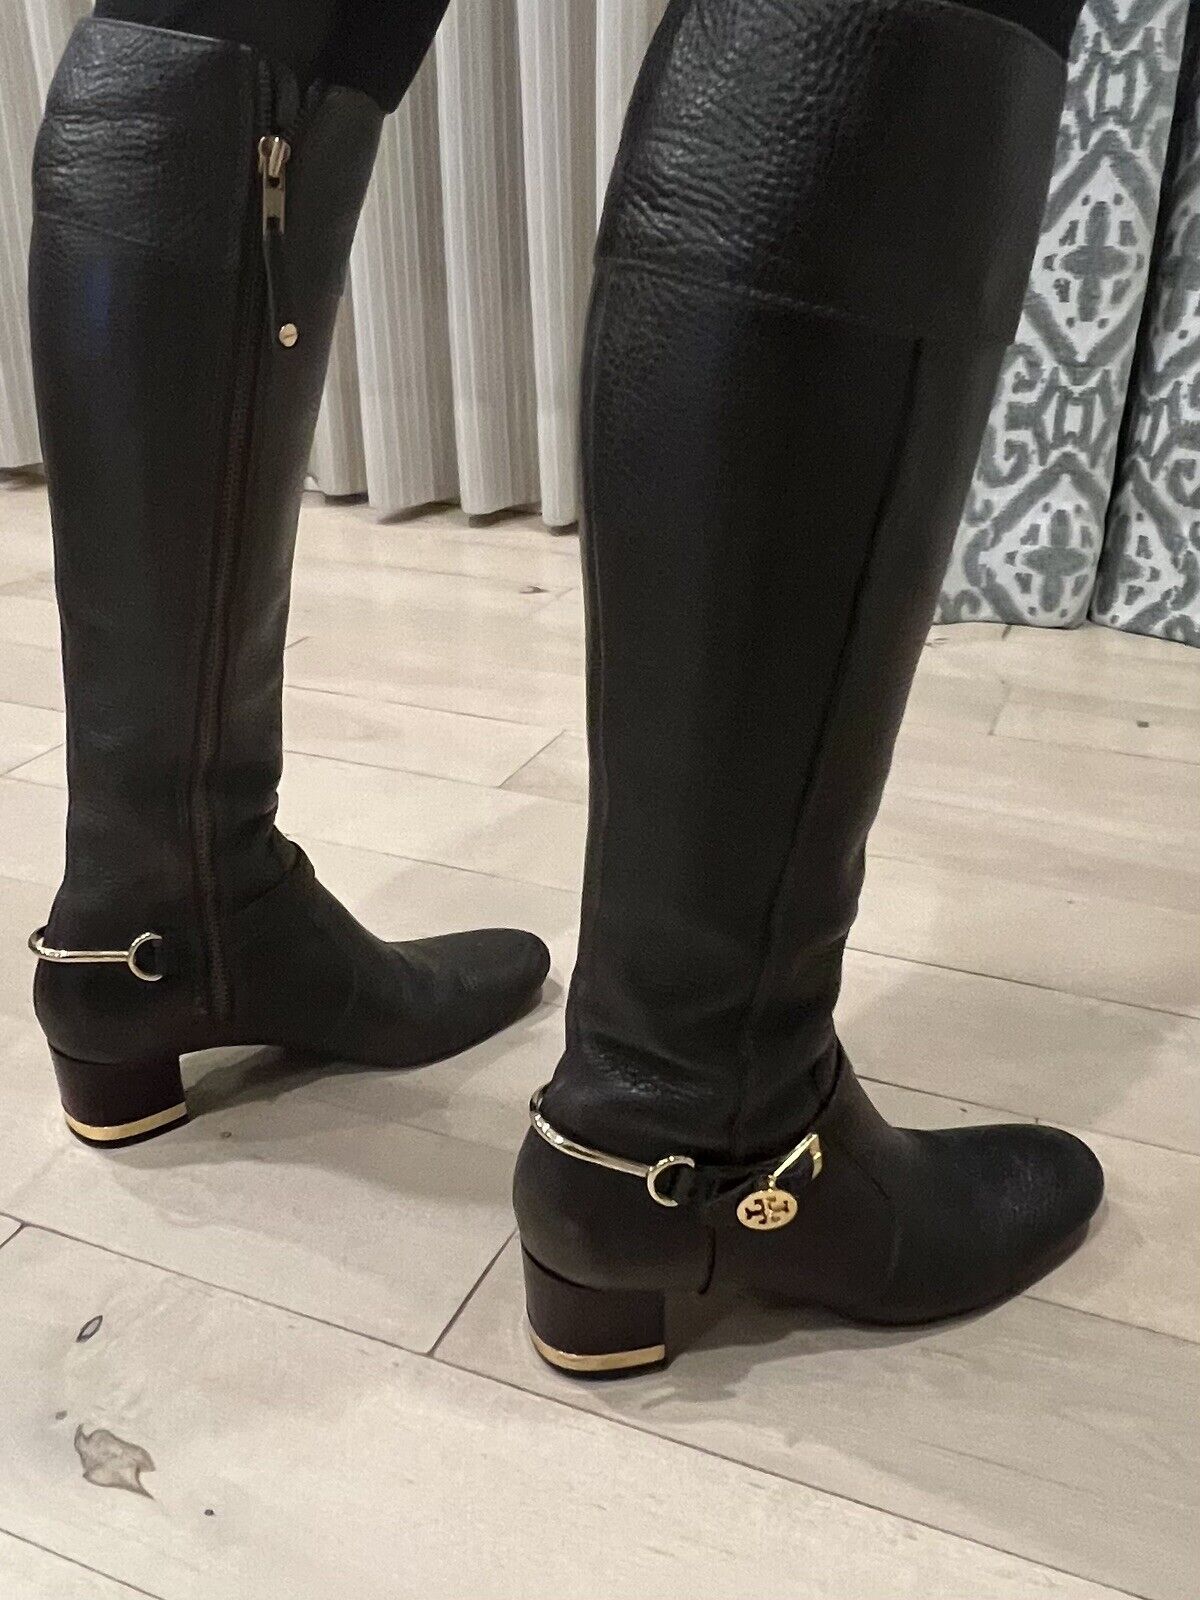 Tory Burch leather brown riding boots women's  | eBay